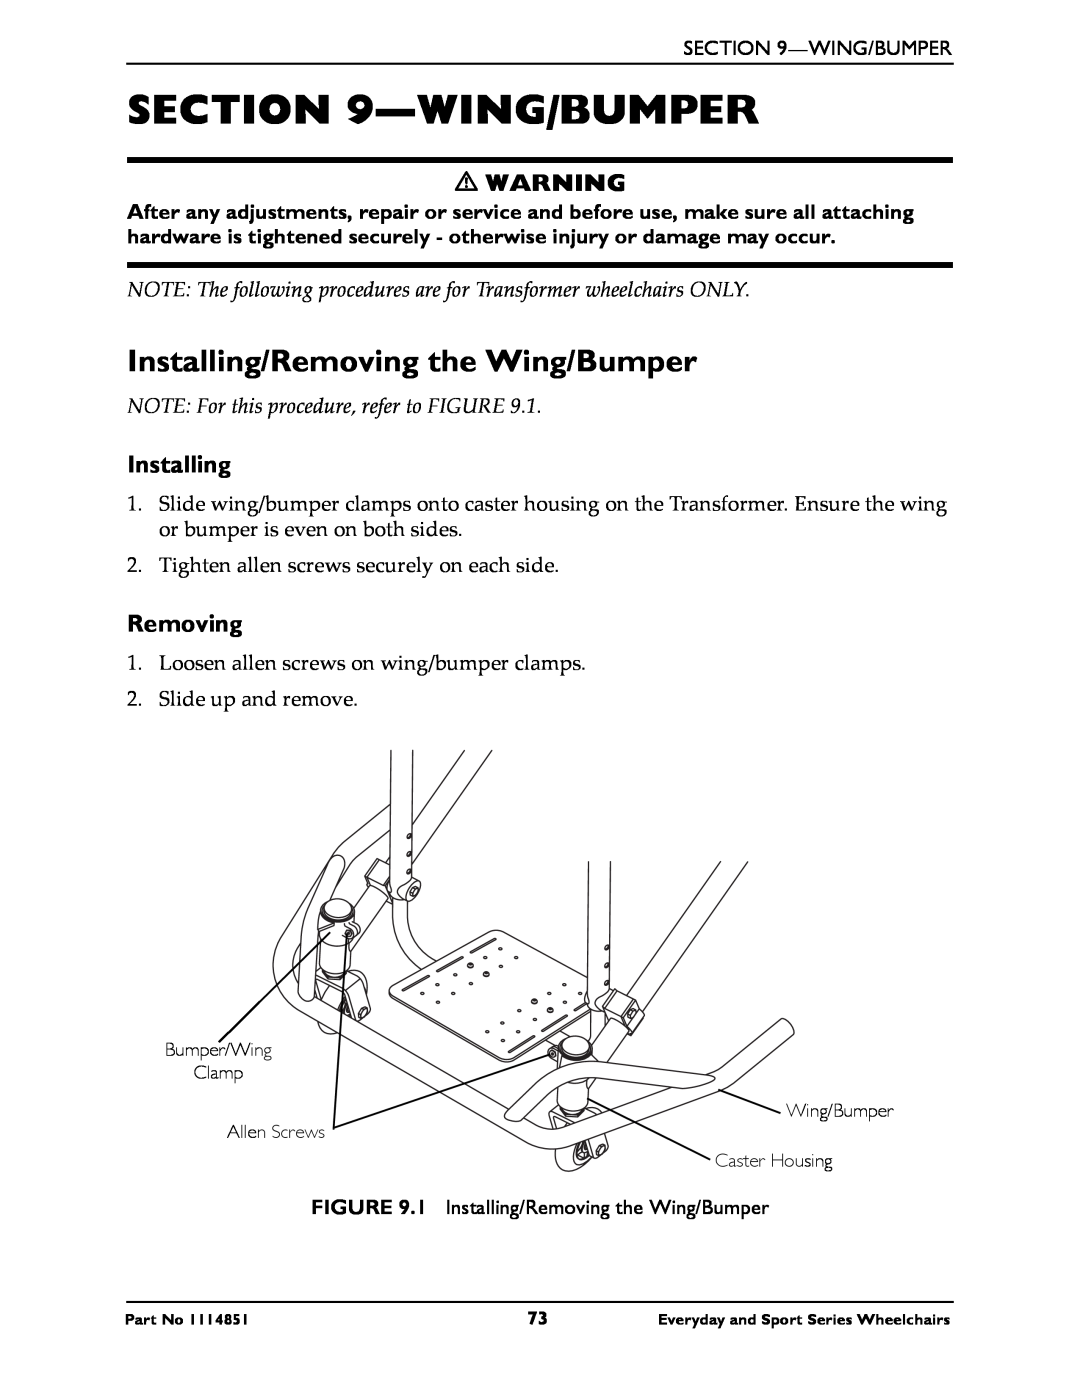 Invacare X-Terminator QR, Terminator BB Installing/Removing the Wing/Bumper, NOTE For this procedure, refer to FIGURE 